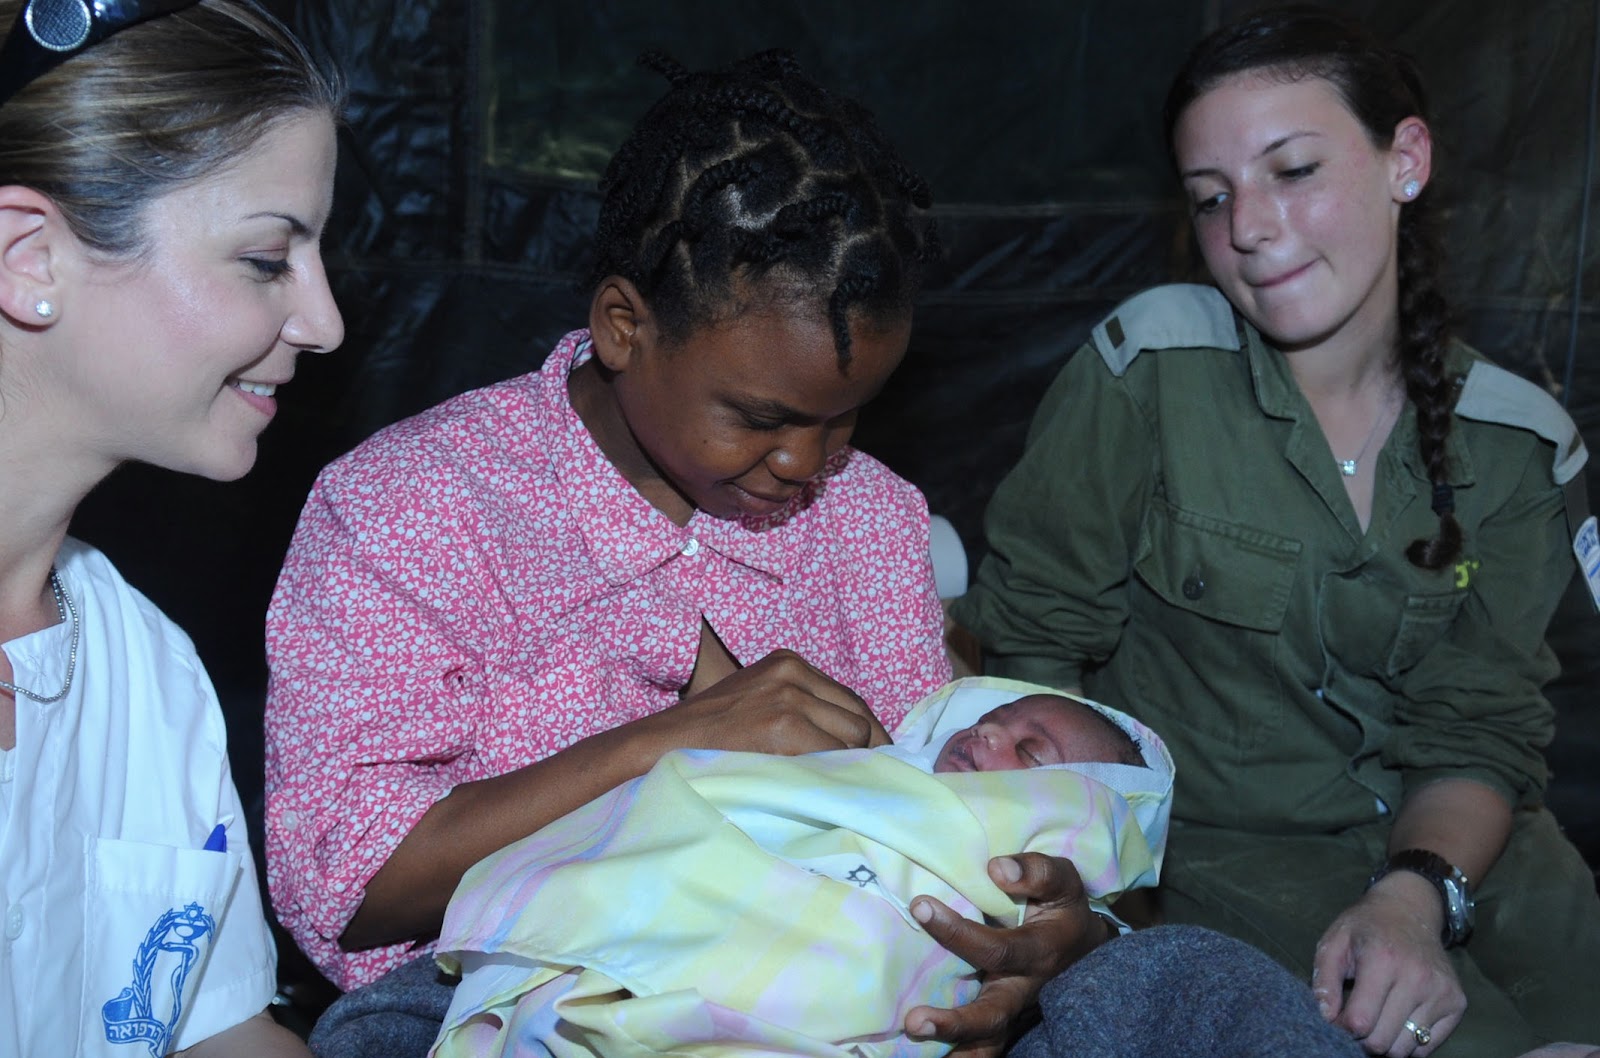 Israel+Defense+Forces;+First+Baby+Delivered+at+IDF+Field+Hospital+in+Haiti,+Jan+2010.jpg